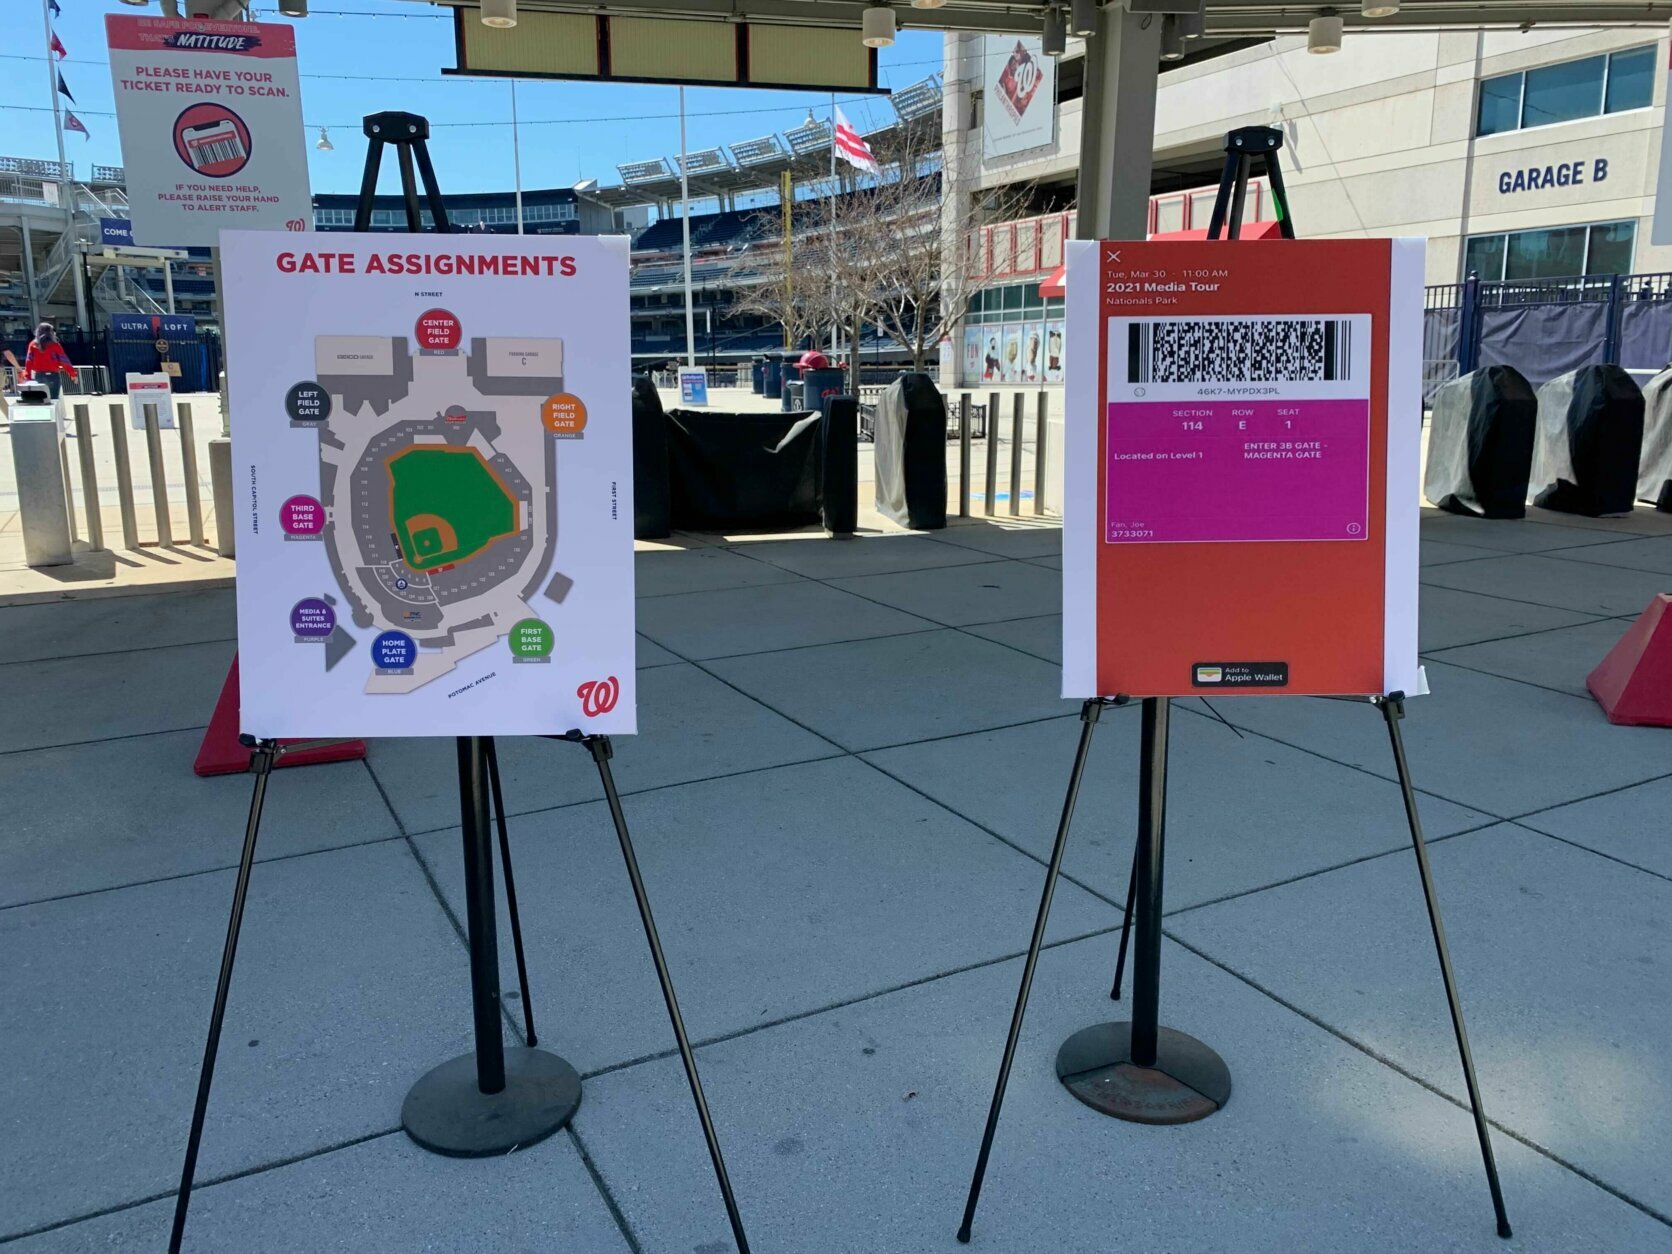 PHOTOS What to expect at Nationals Park on Opening Day WTOP News